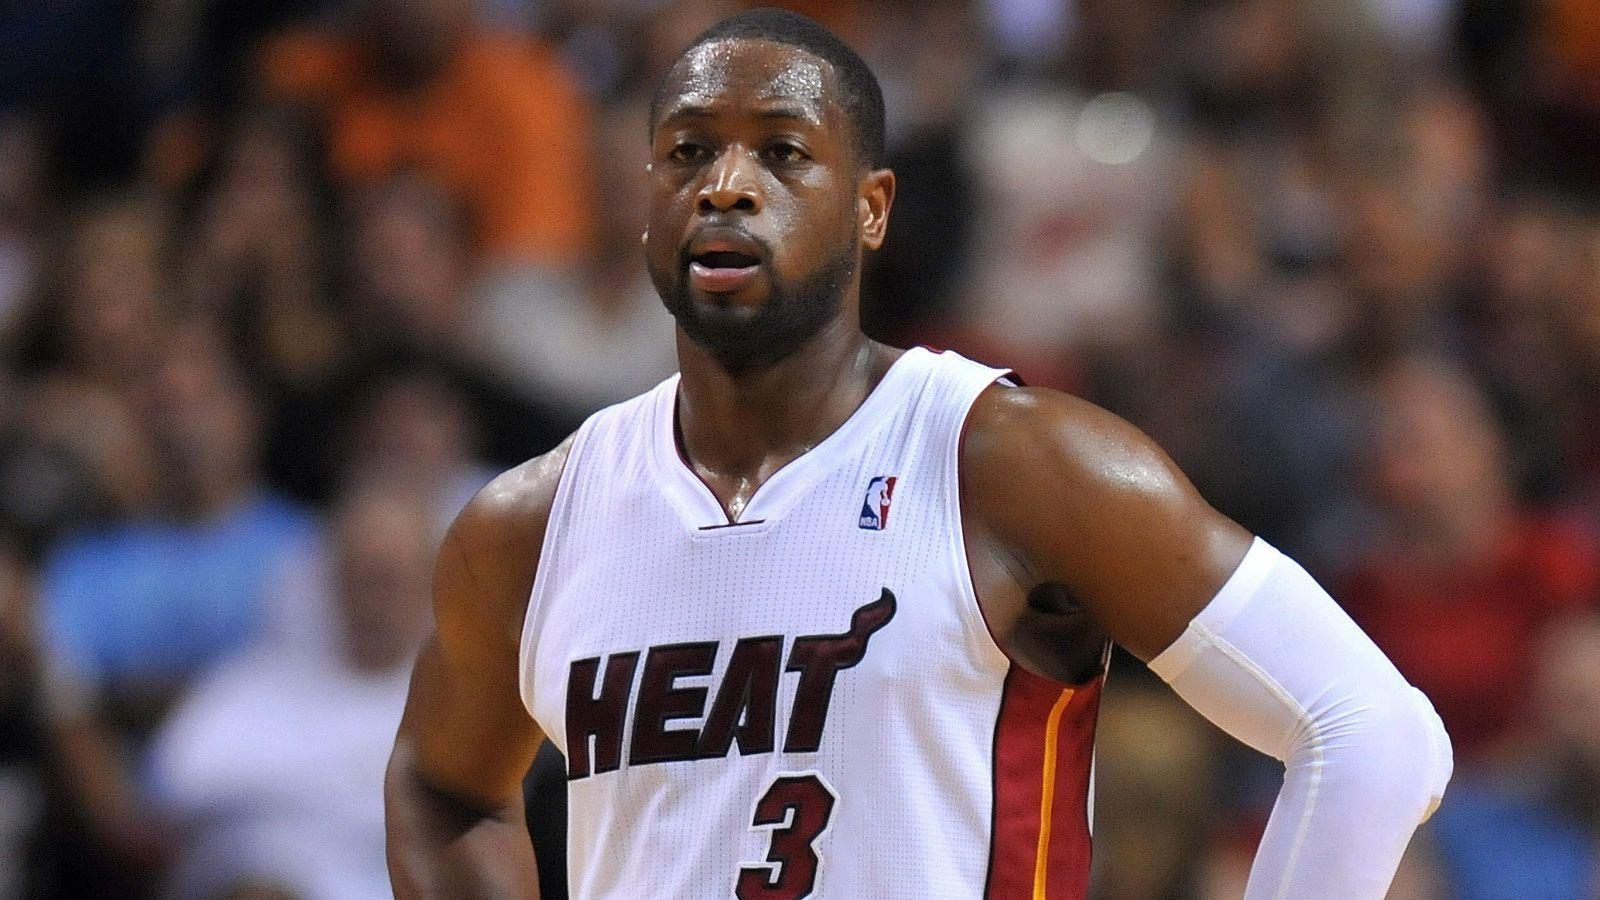 Chicago Bulls changed reality by signing free agent Dwayne Wade